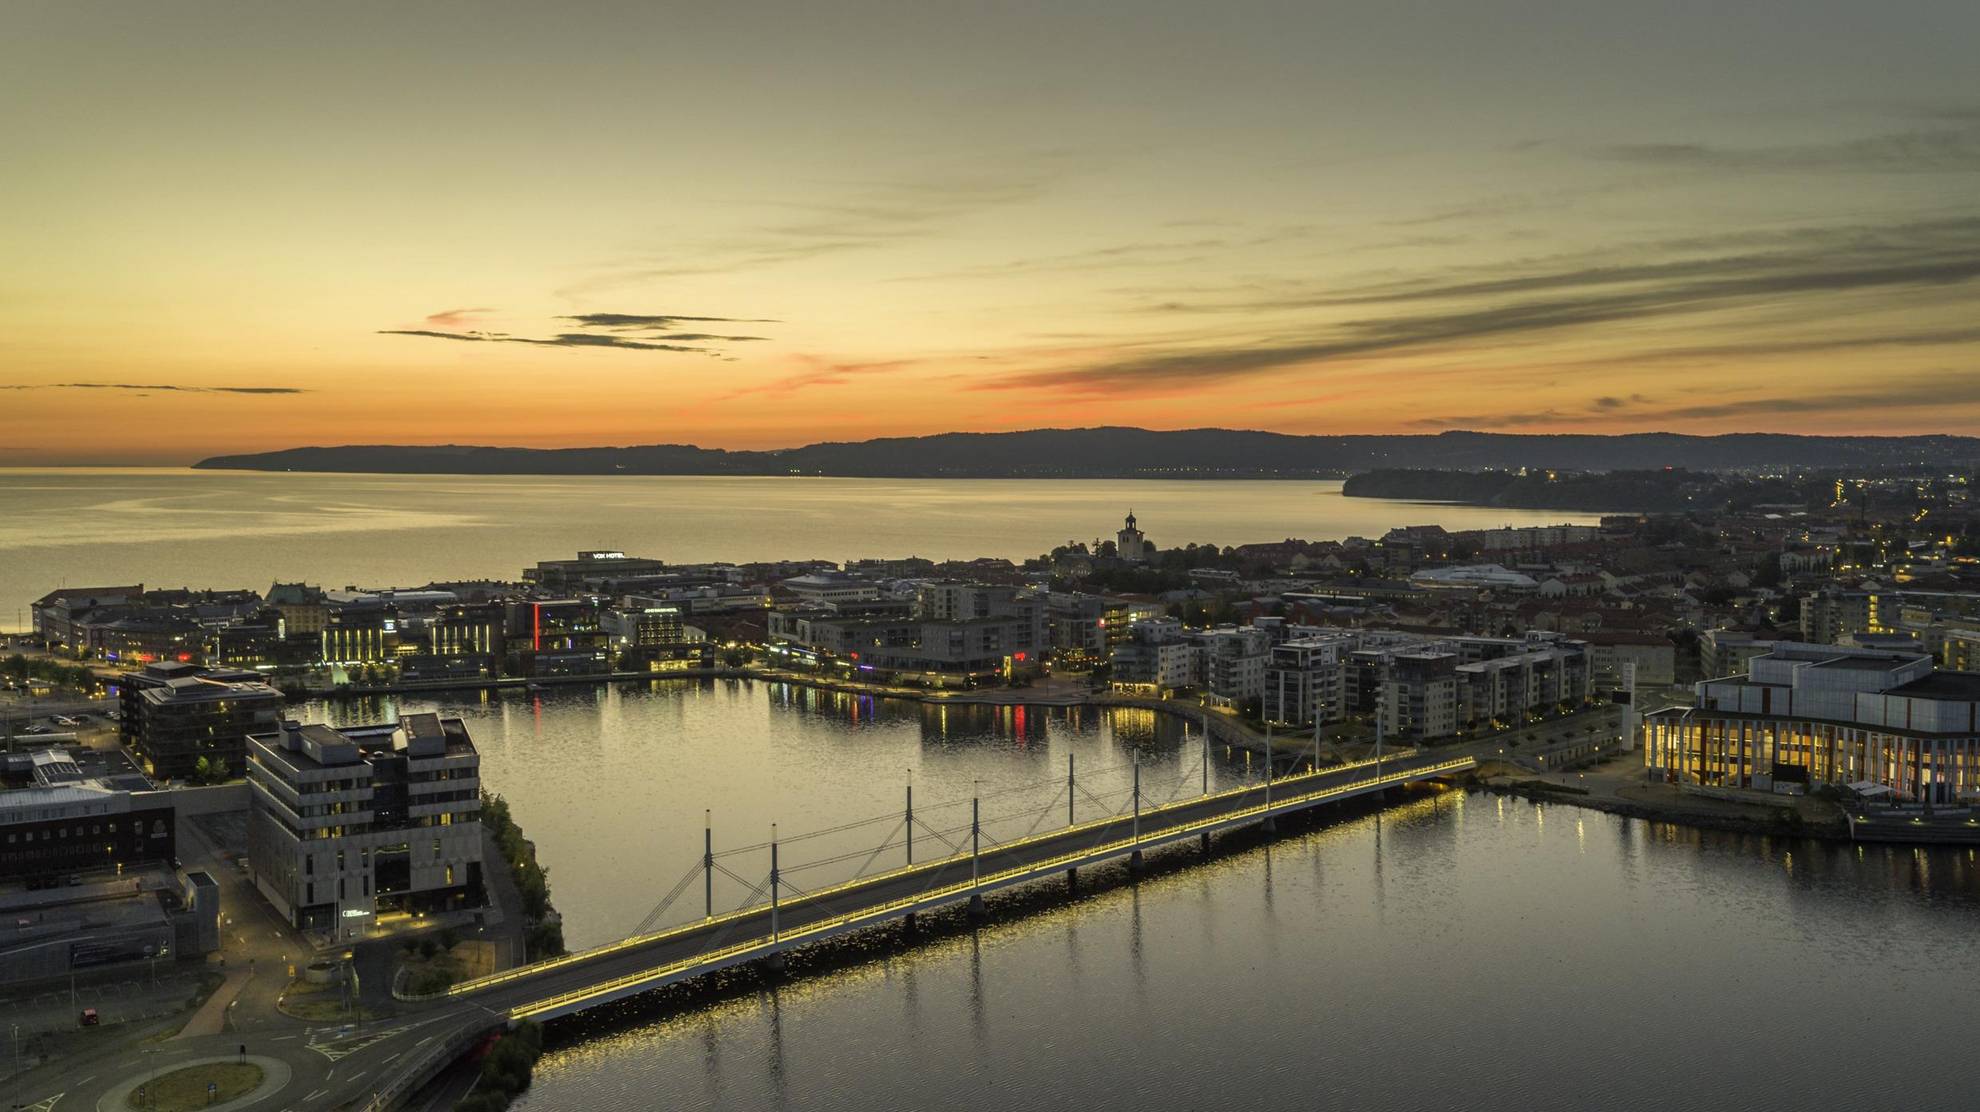 Aerial view over Jönköping city, and a lake, as the sun is setting.